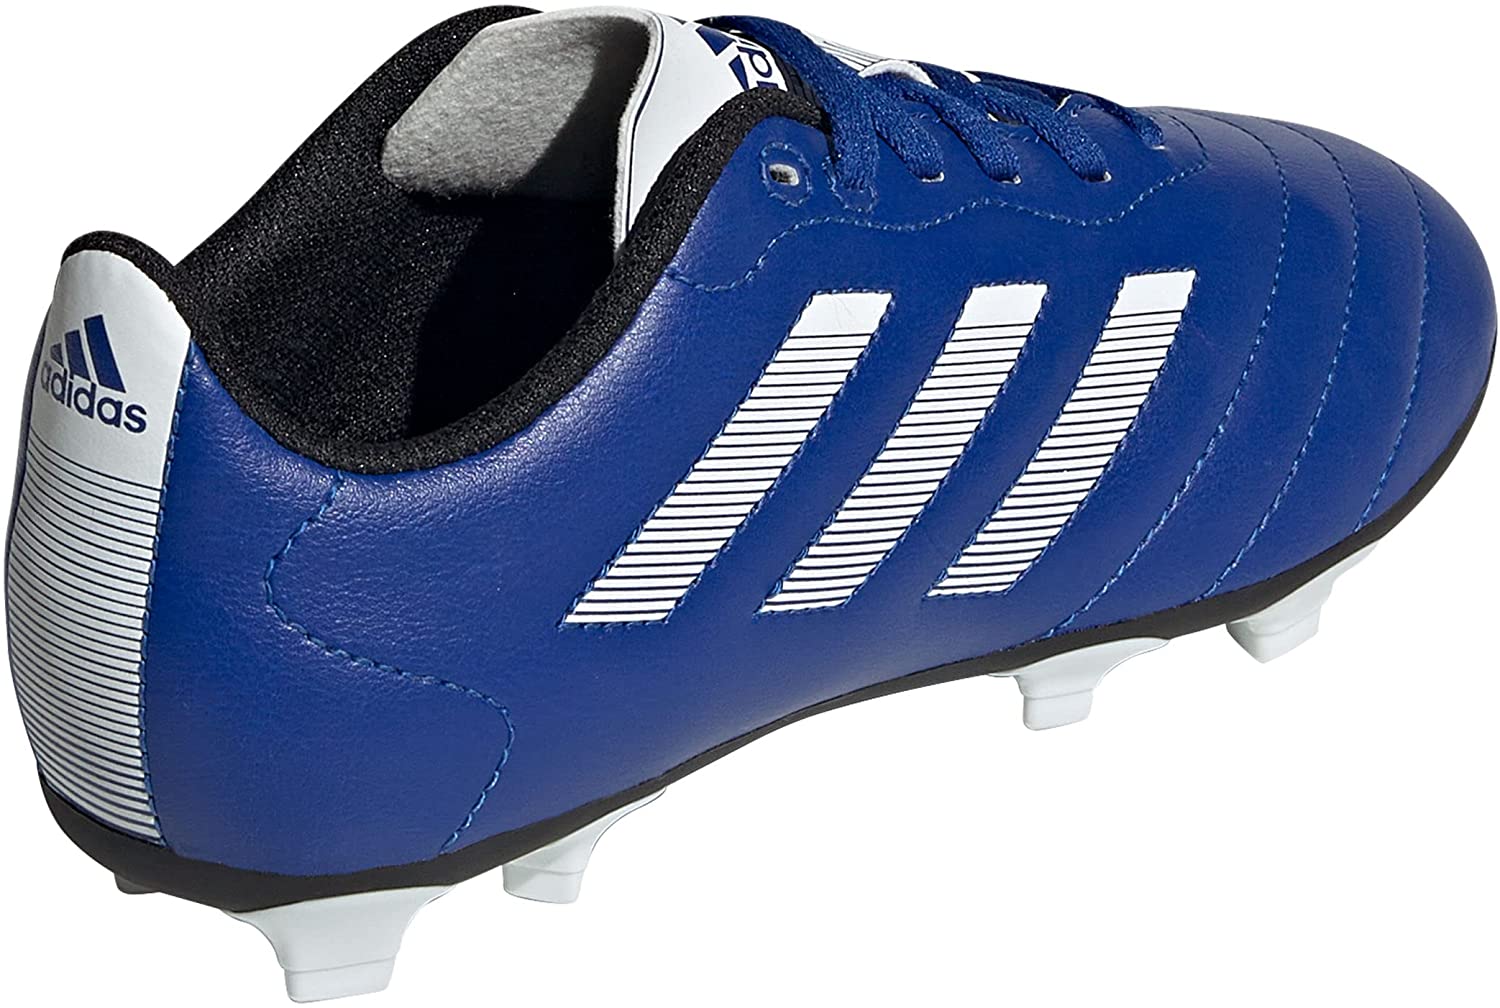 adidas Kids Unisex Soccer Goletto VIII Firm Ground Cleats - Royal Blue / Cloud White / Core Black - 6K